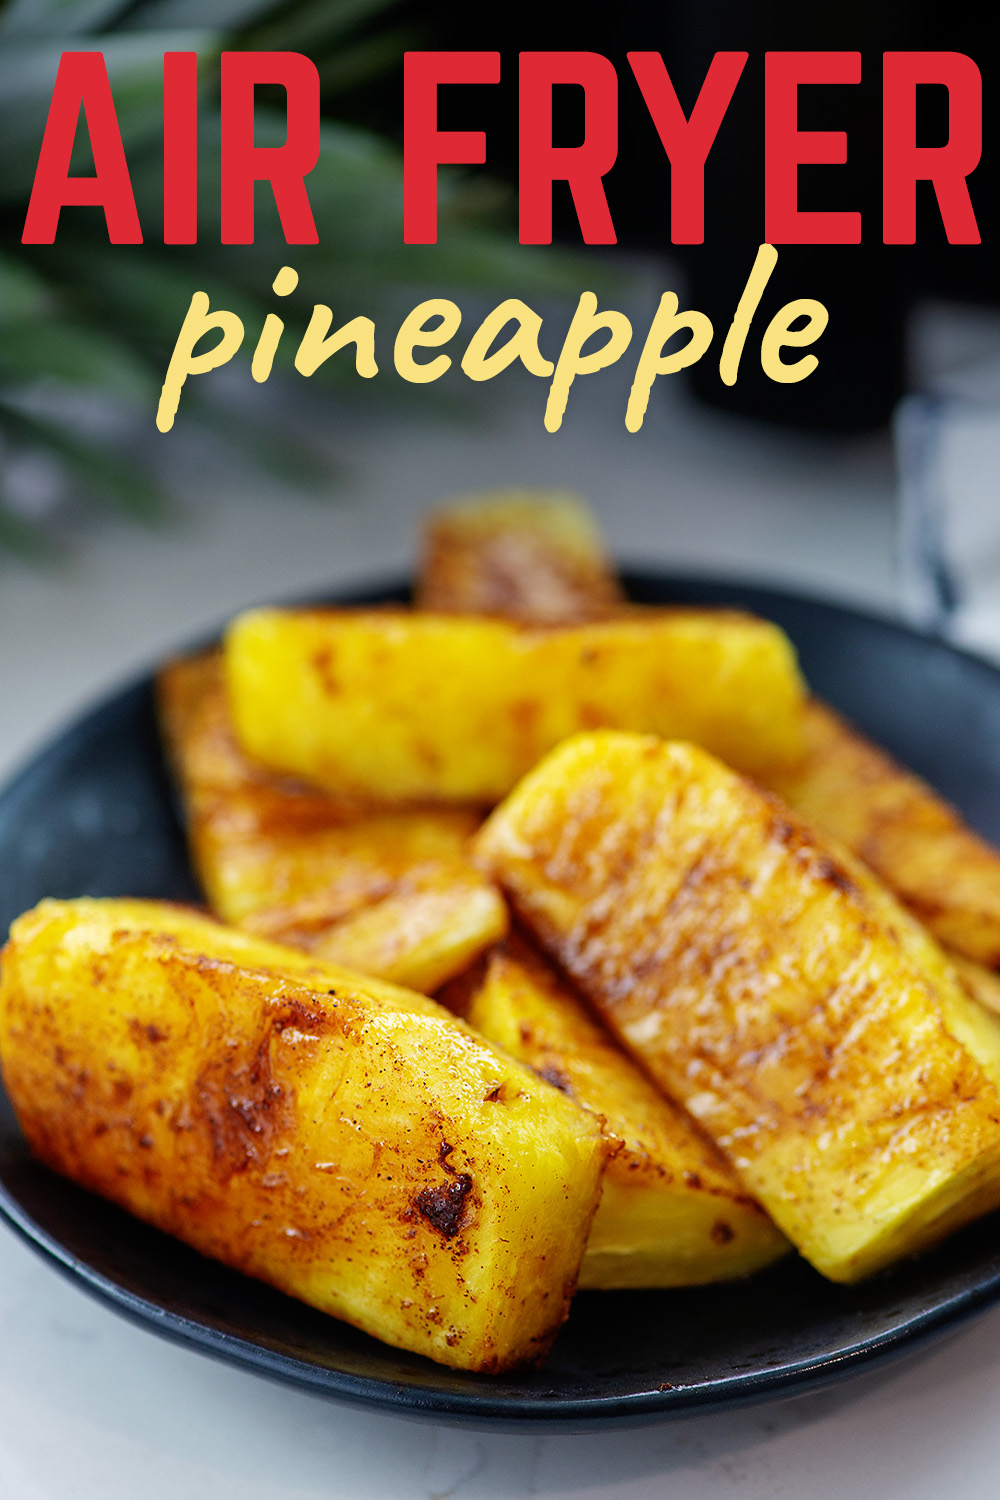 These slices of cinnamon pineapple are a fantastic snack or dessert after a filling meal!